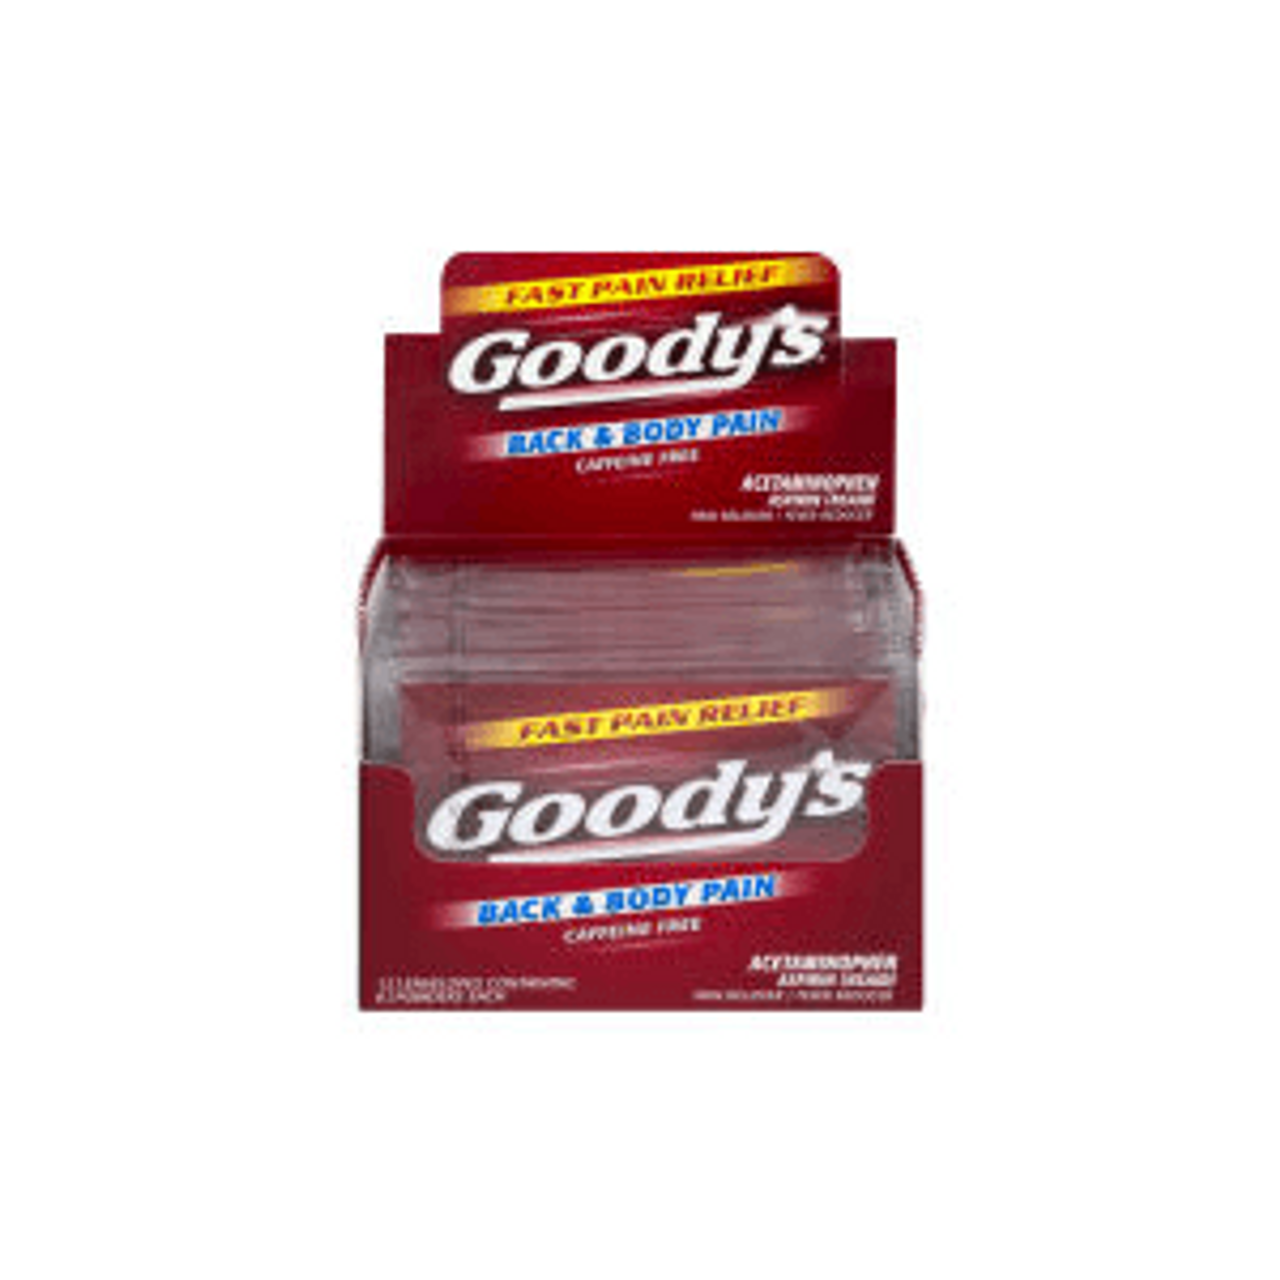 Goody's Red Back and Body Pain